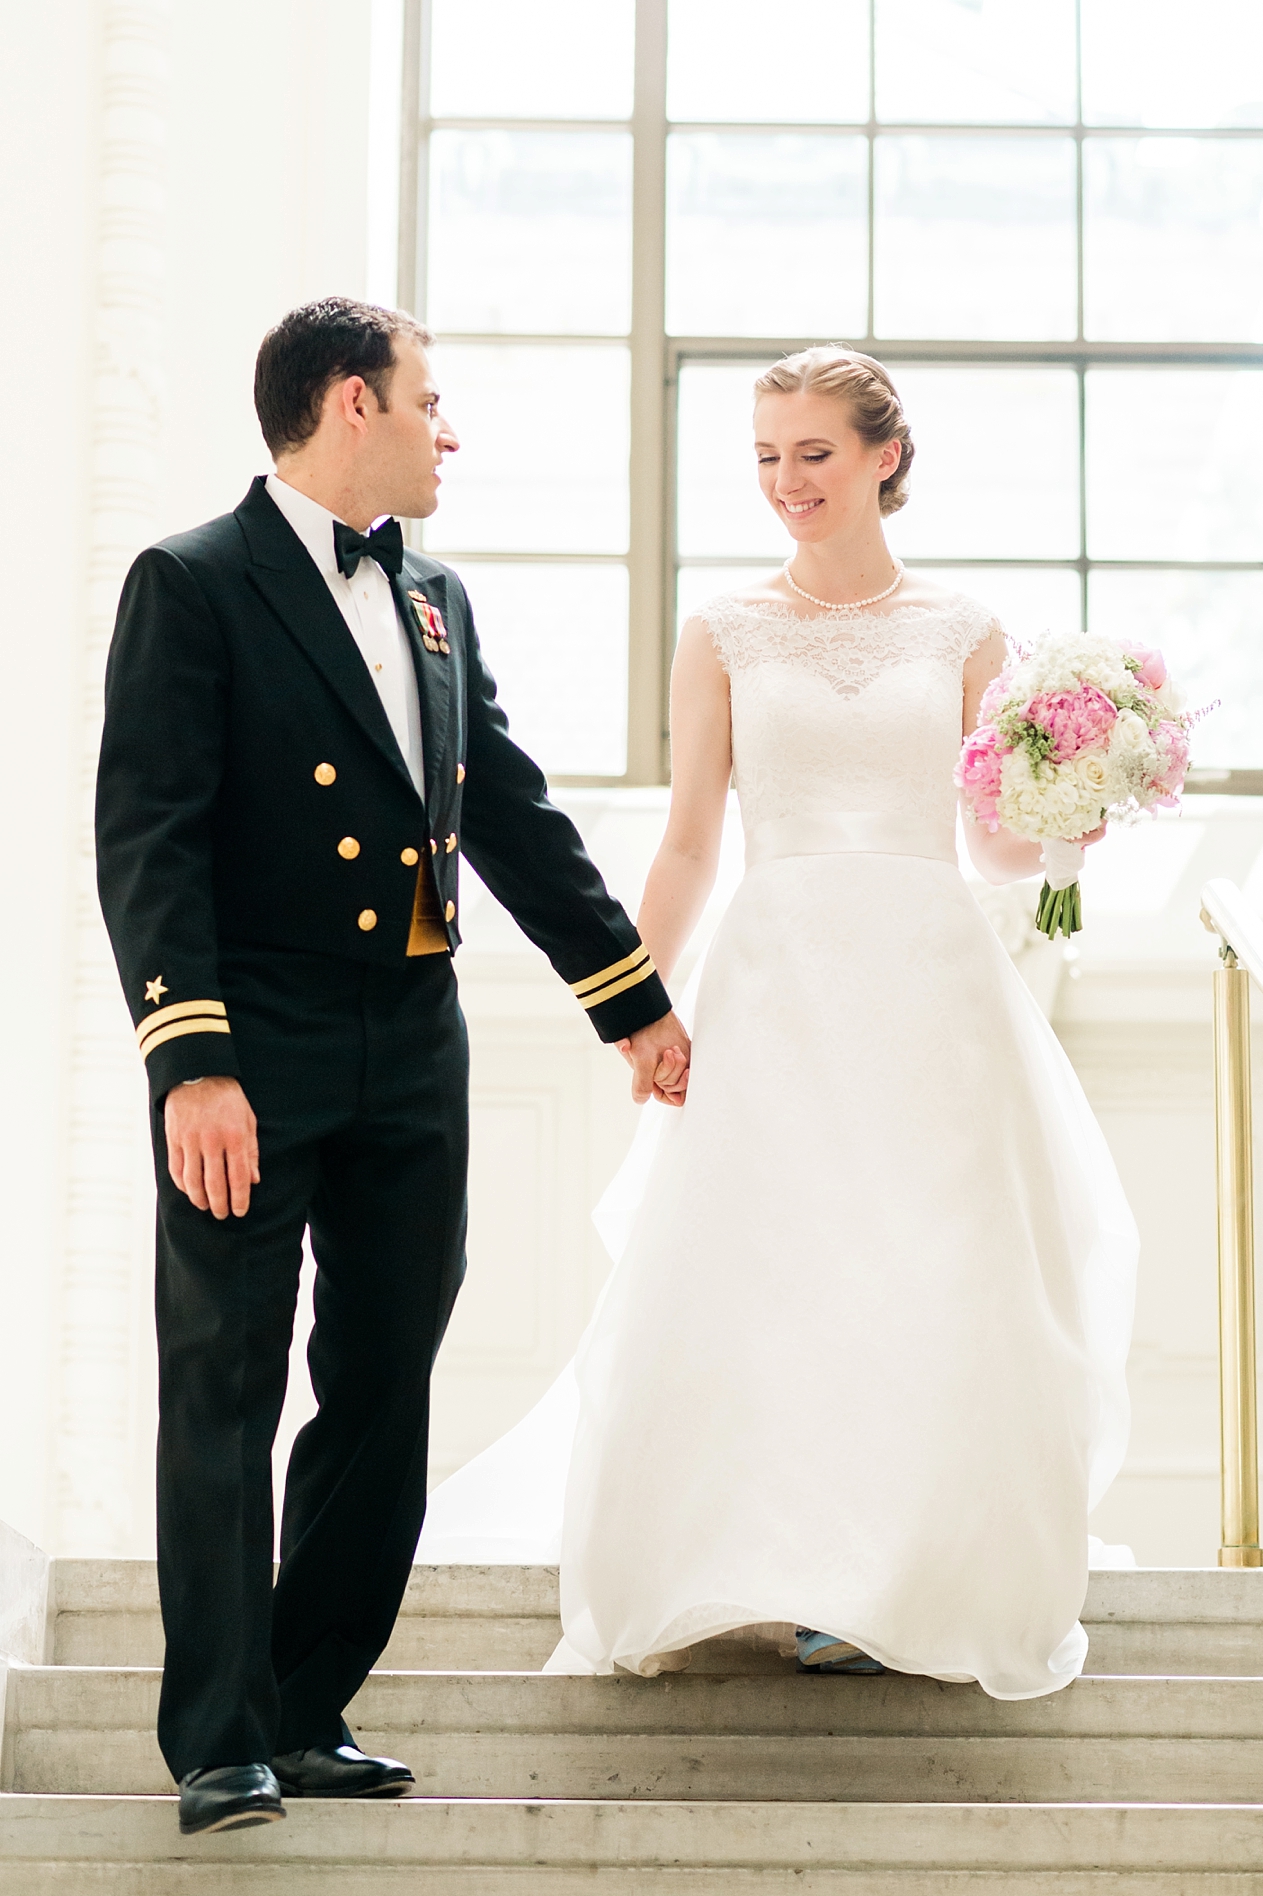 A Classic + Romantic, Jackie O' inspired wedding day at the Naval Academy Chapel | Annapolis, Maryland Fine Art Wedding Photographer | Lauren R Swann